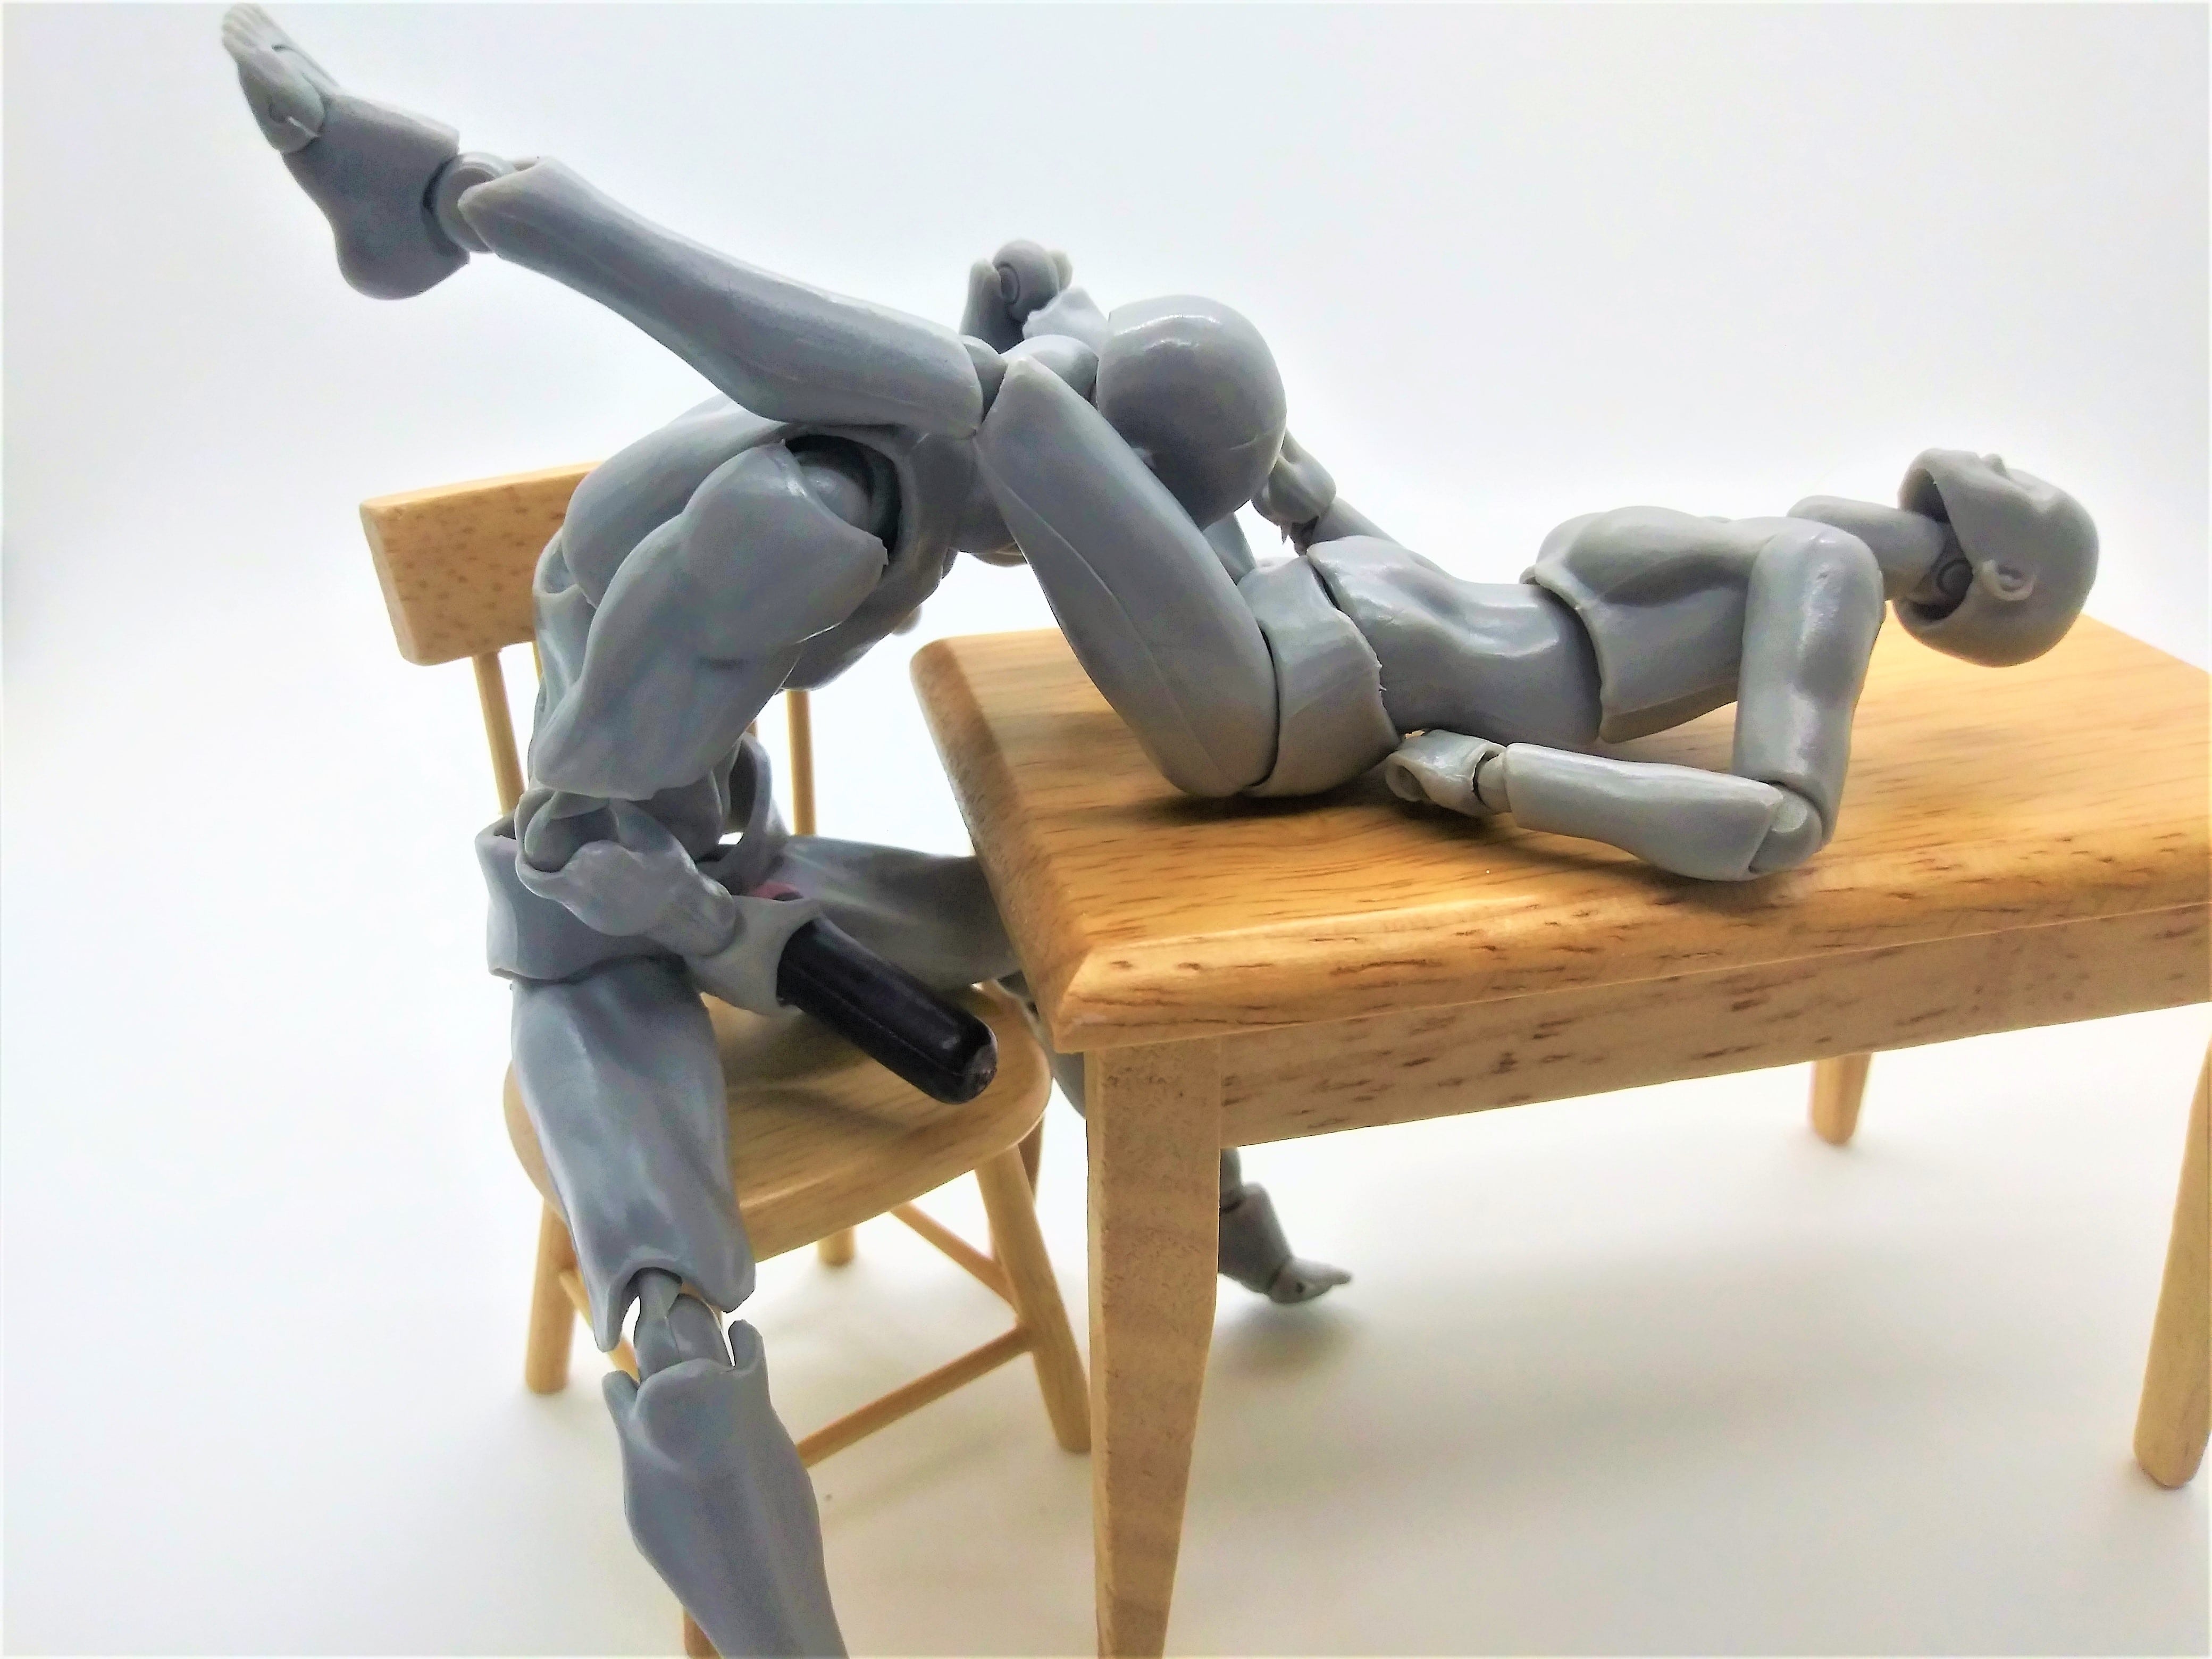 sex positions with small figures